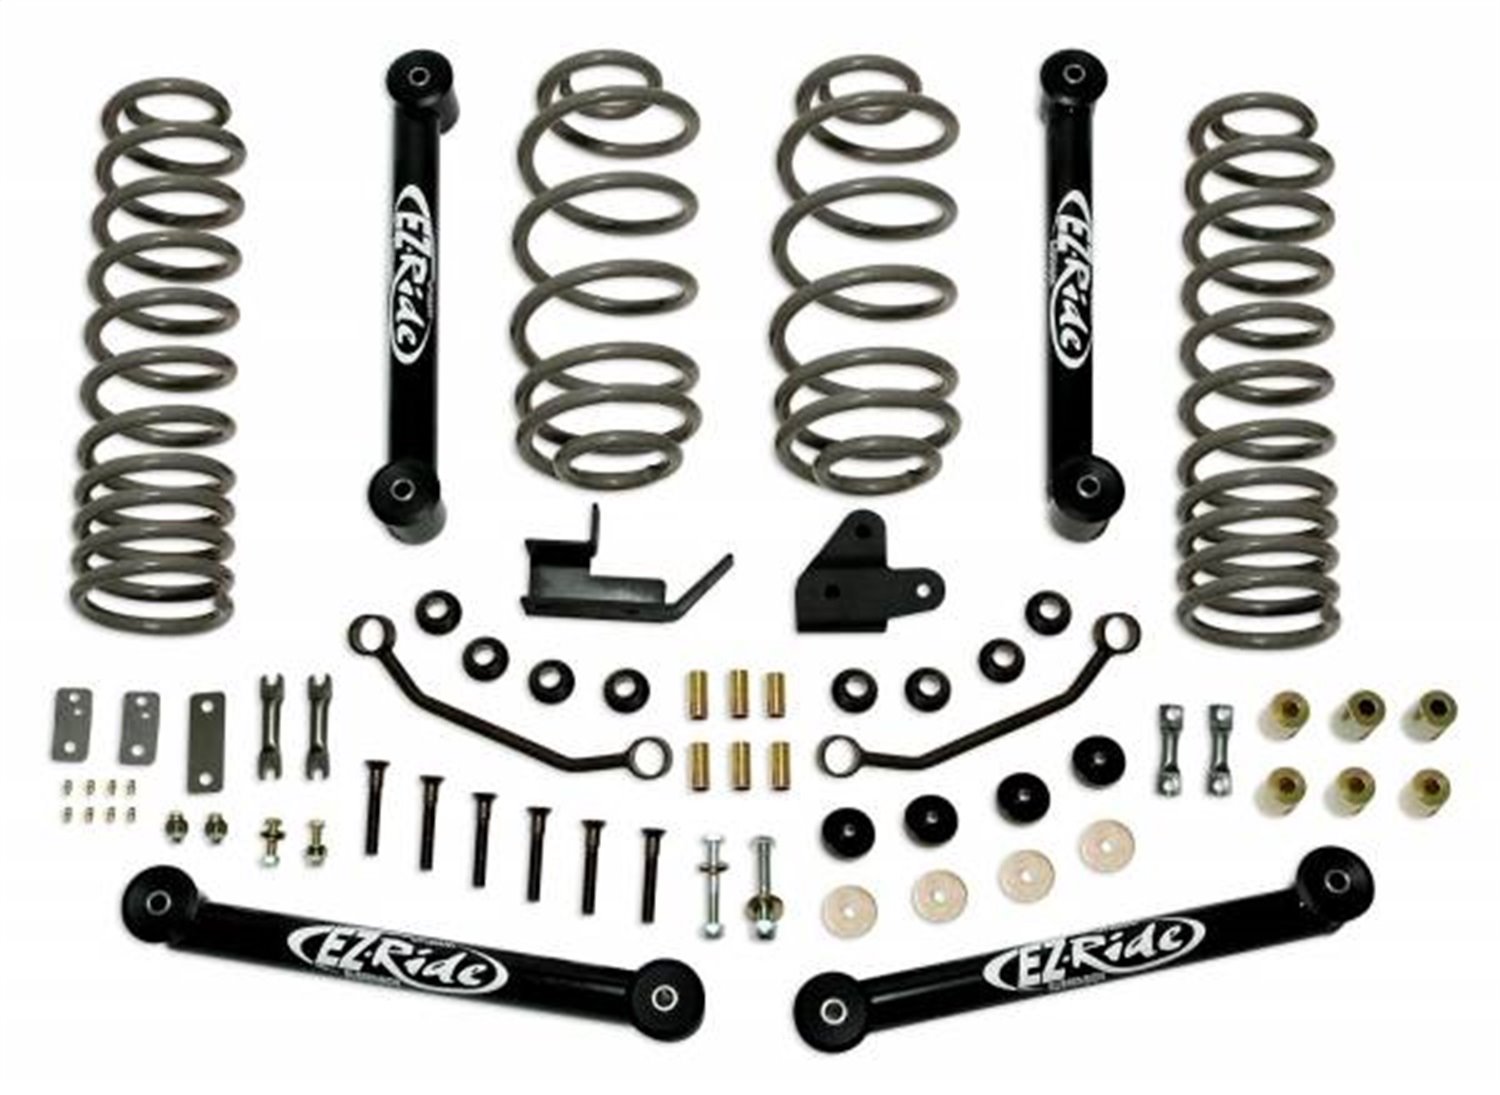 Lift Kit 4 in. Incl. Coil Springs/Track Bar Relocation Bracket/Control Arms/Sway Bar End Links/Hardware Bag/Poly Bushing Bag